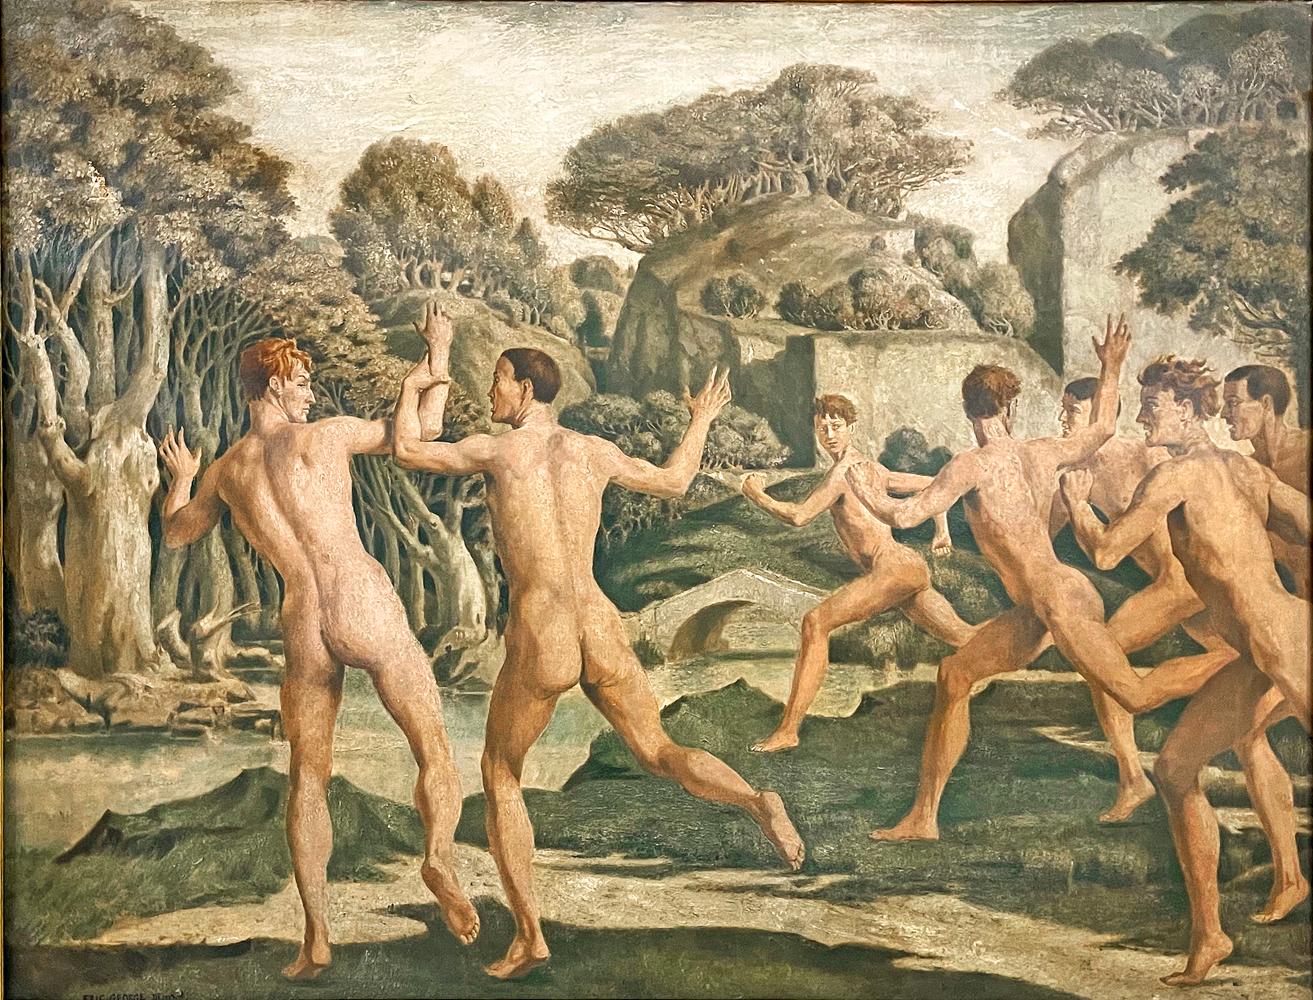 Large and striking, this painting by Eric George depicts a group of seven nude male figures racing toward a glistening stream, the quiet green trees and lawns embracing the figures as they exclaim and shout to each other. This seems to be a scene